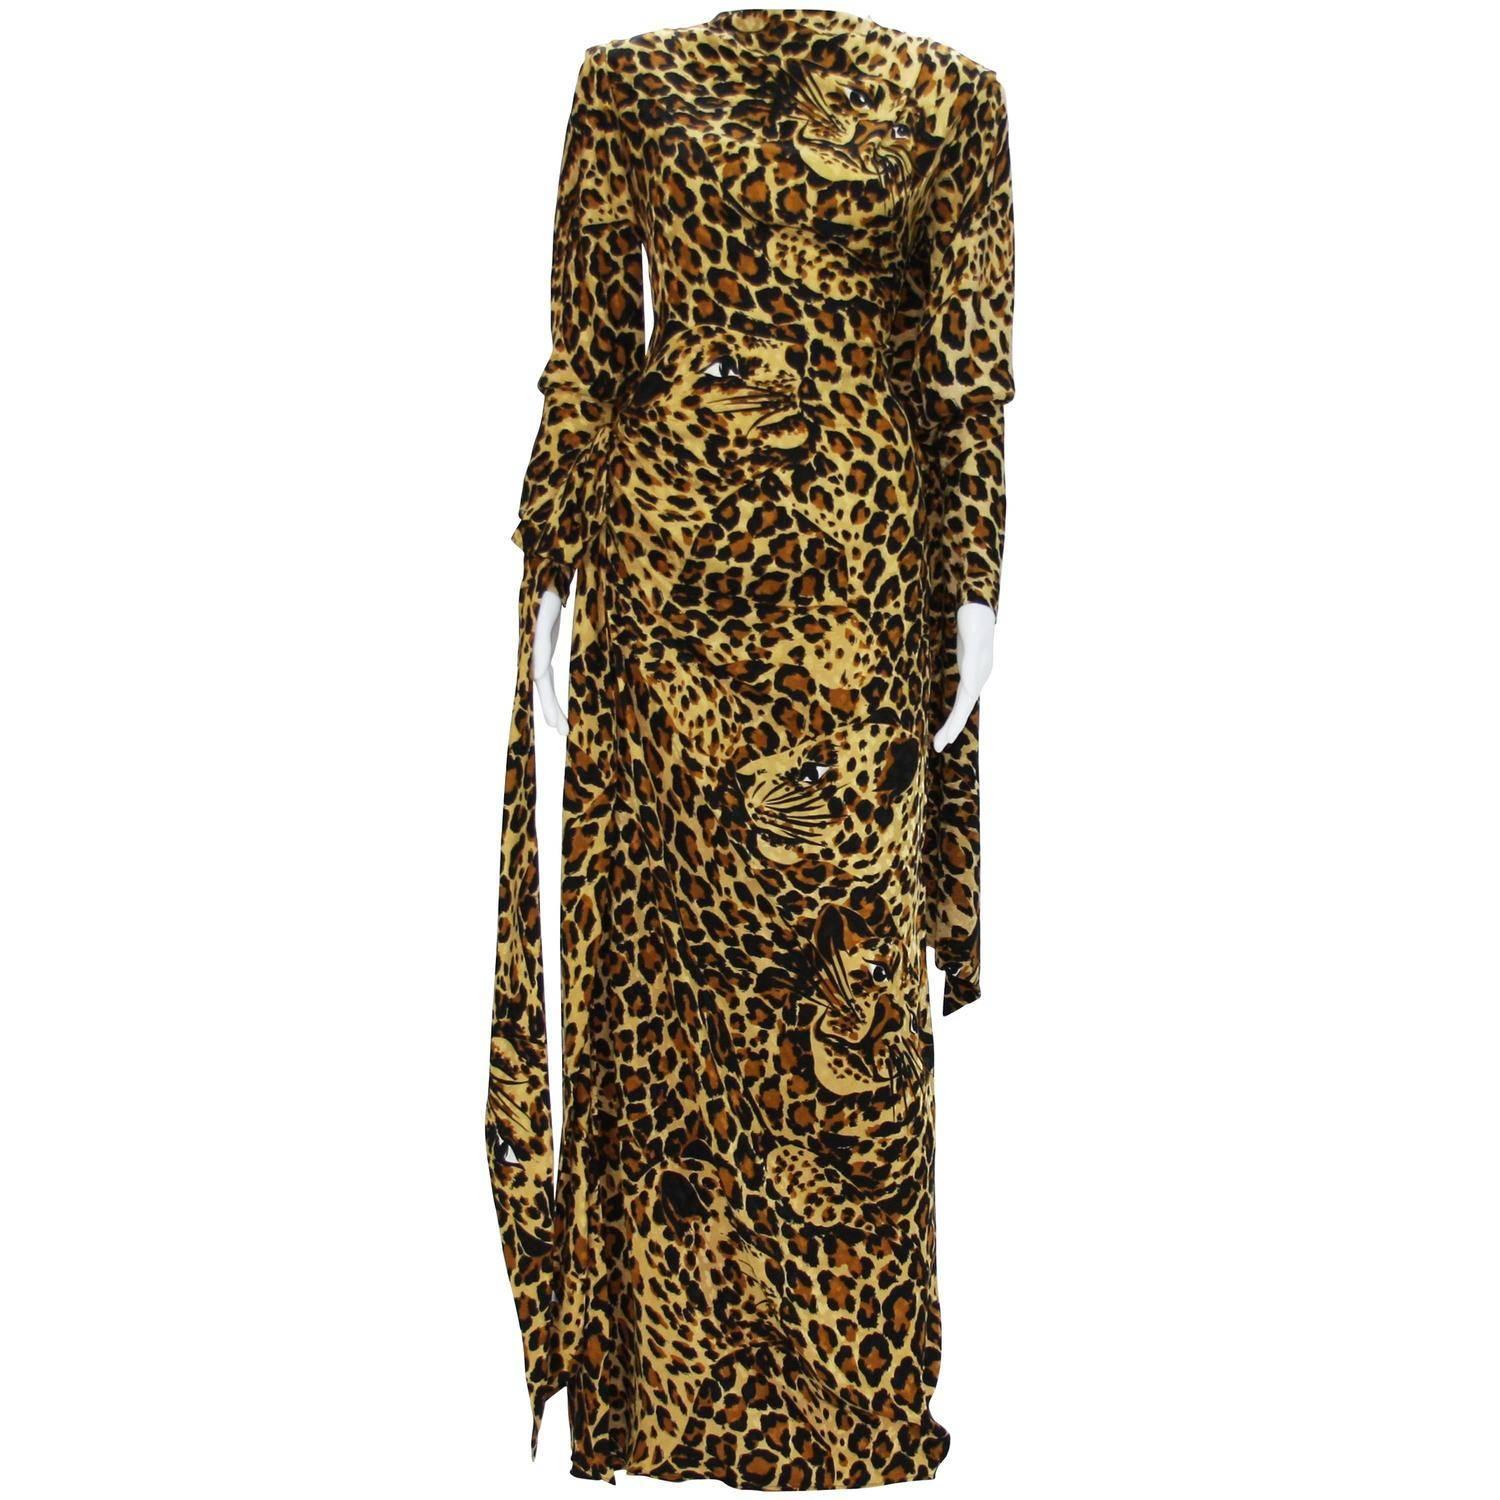 Yves Saint Laurent Runway F/W 1982/83 Leopard Silk Gown with High Slit Scarf Fr. For Sale